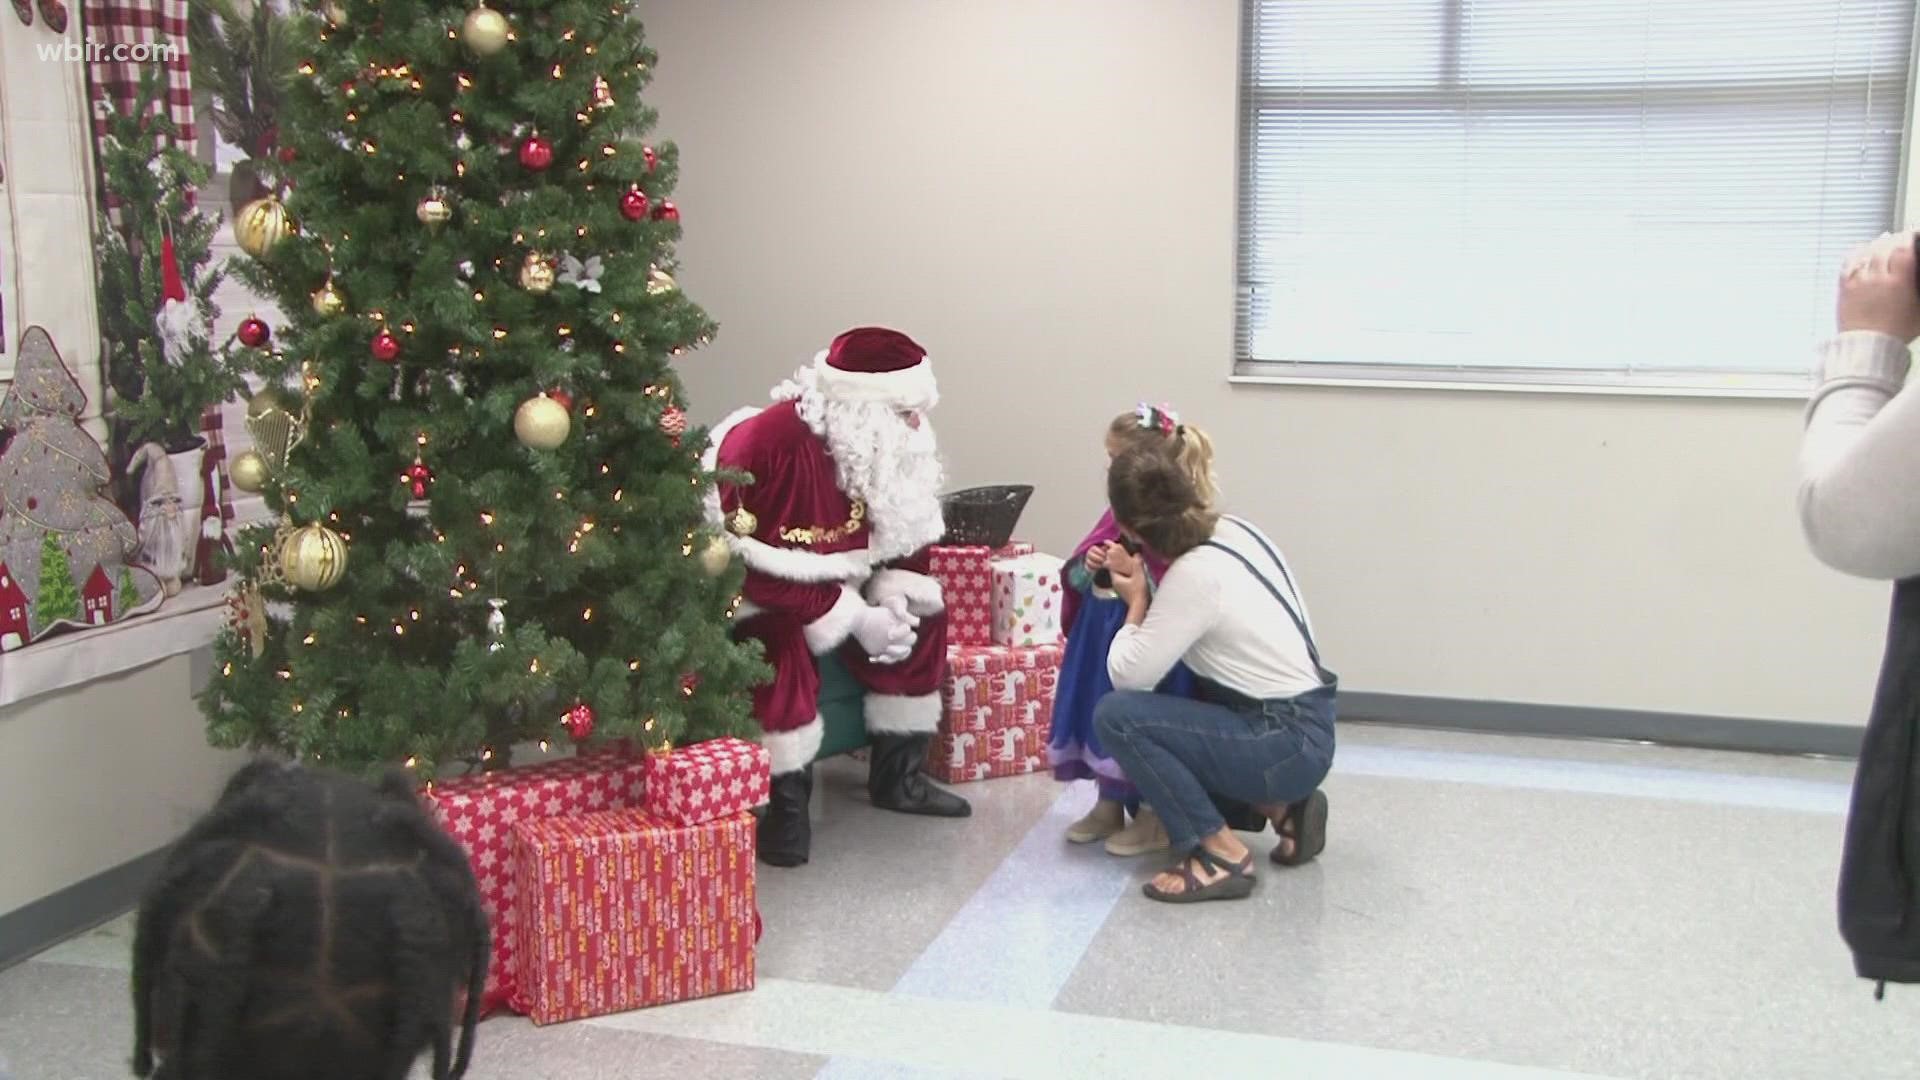 Families will be able to grab some breakfast while visiting Santa Claus at the YMCA.